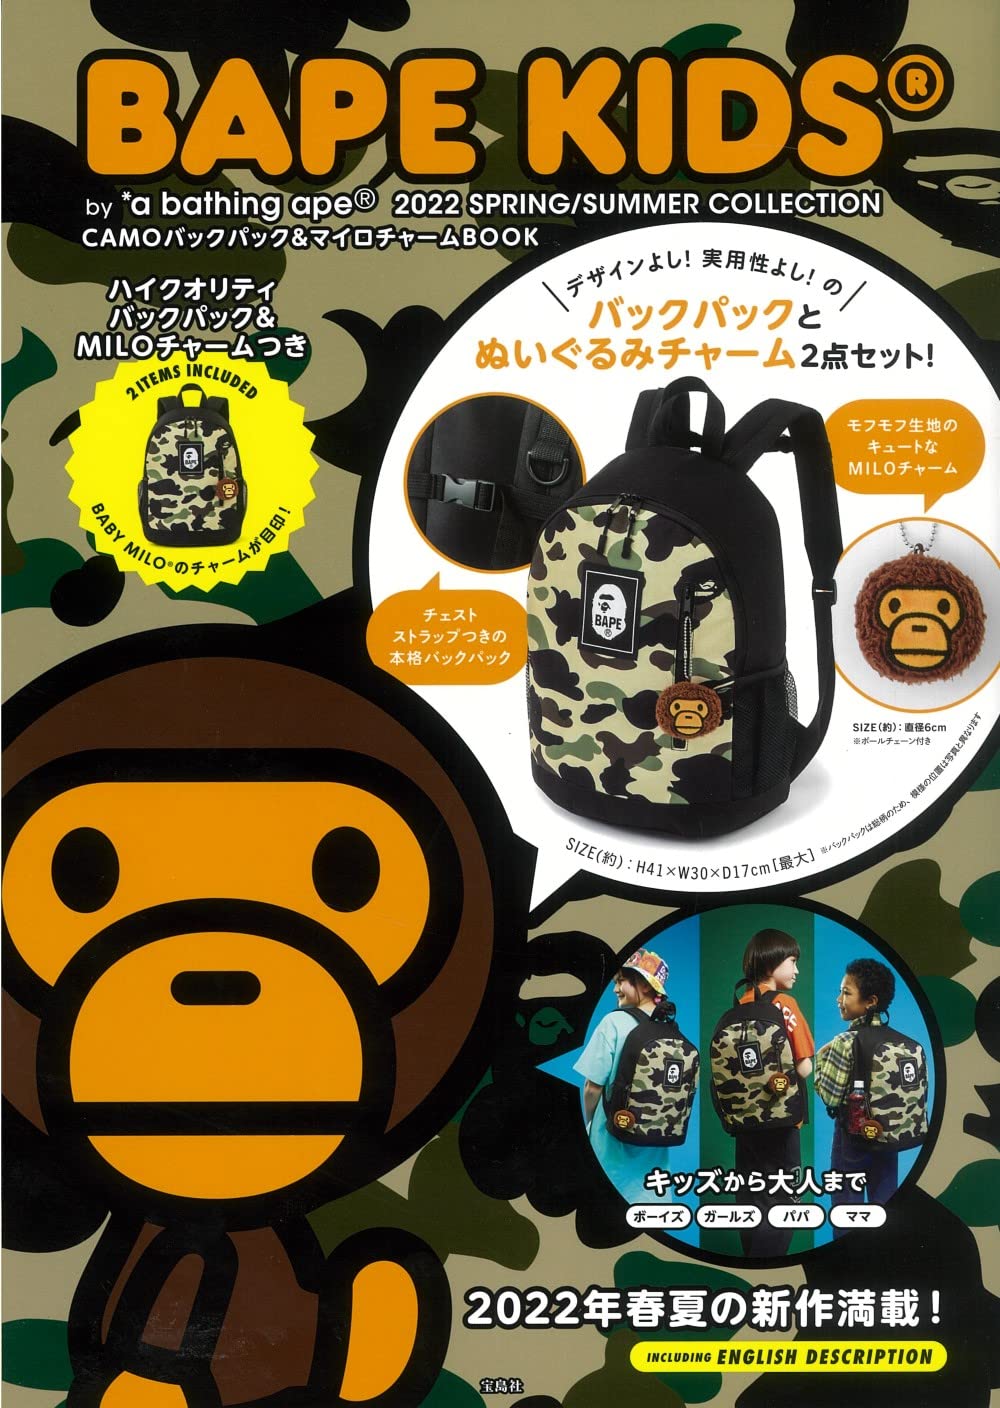 BAPE KIDS® by *a bathing ape® 2022 SPRING/SUMMER COLLECTION CAMOバックパック&マイロチャ-ムBOOK